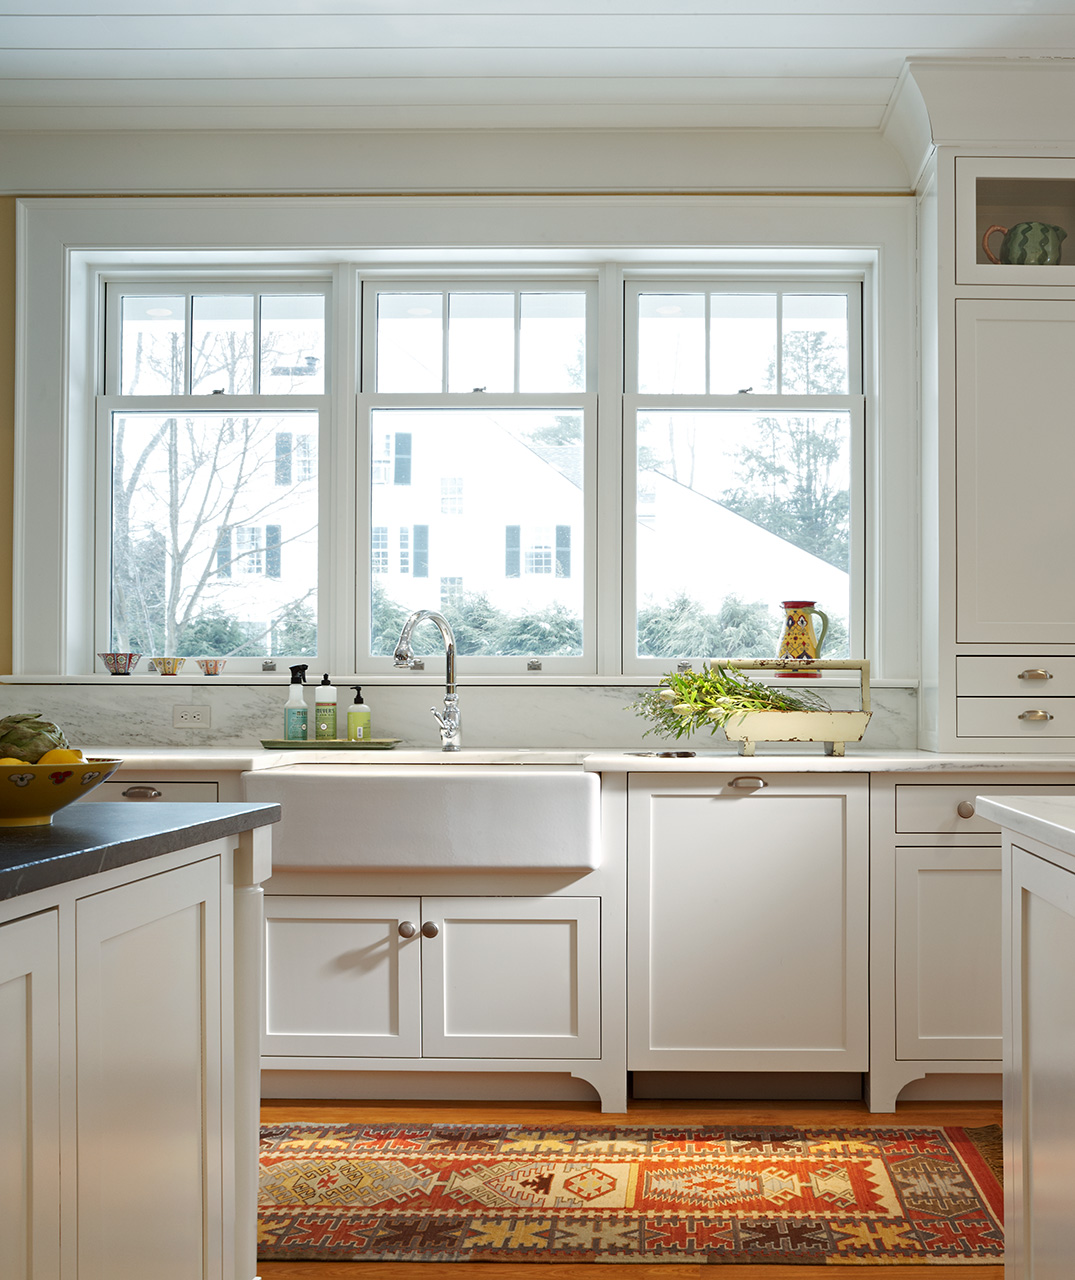 Bright kitchen interior with white cabinetry and a farmhouse sink beneath a large three-section window offering a view of a house outside. The counter is adorned with fresh fruits, herbs, and kitchen supplies. A colorful oriental rug lies on the floor, adding warmth to the space.